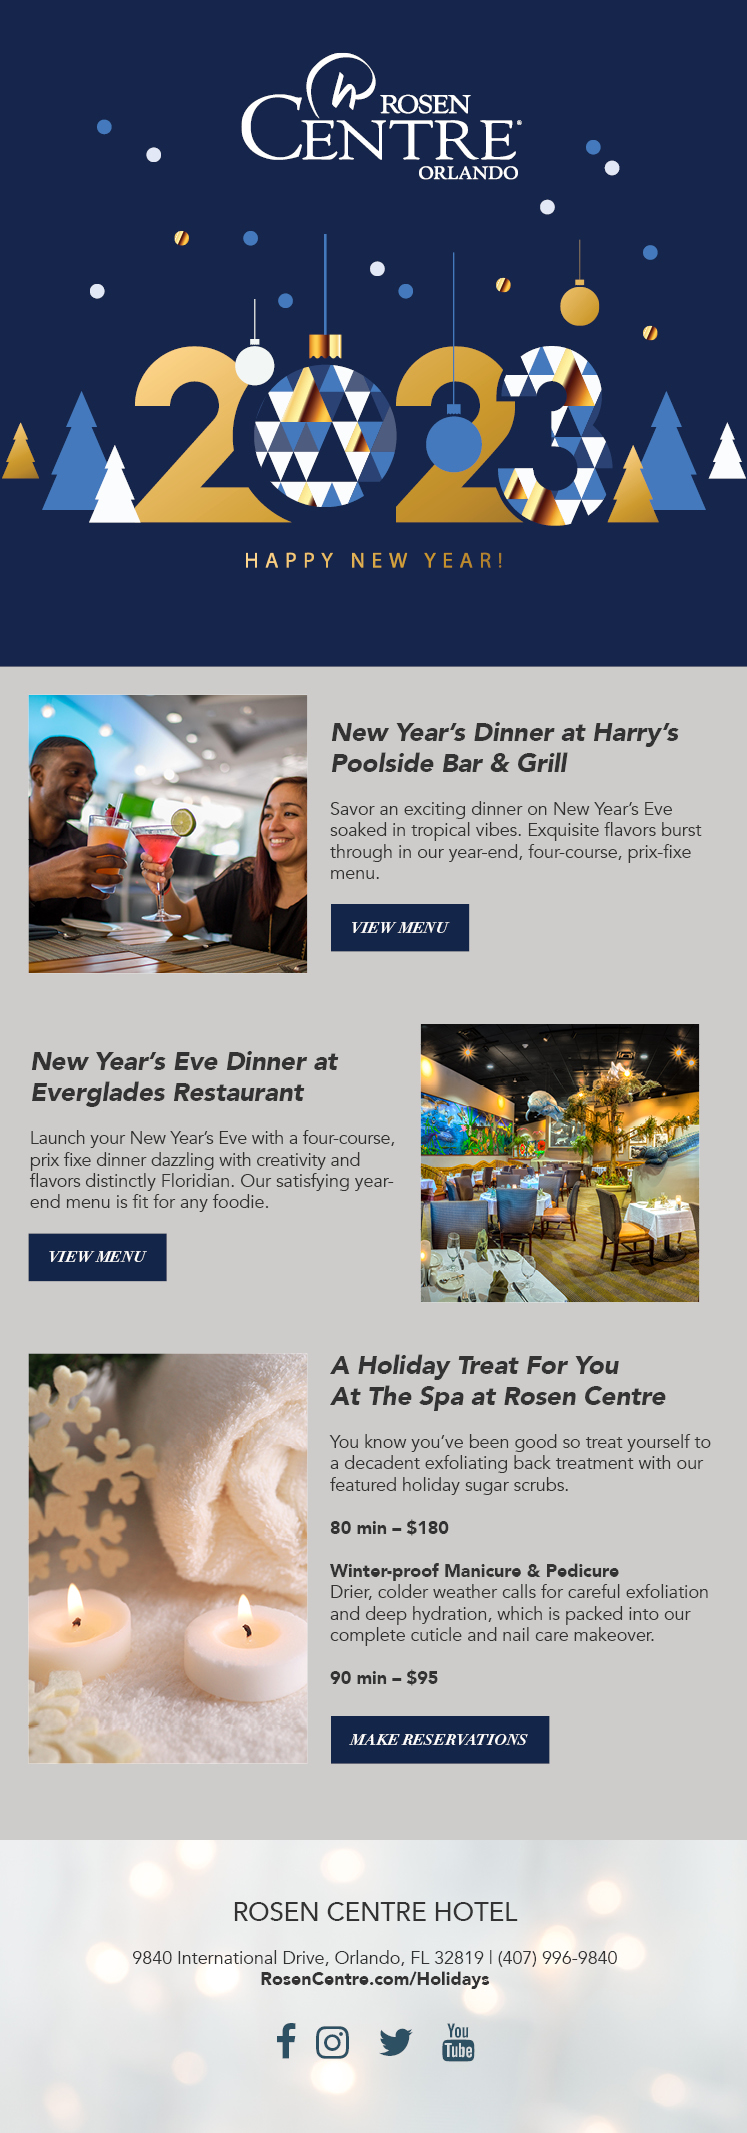 New Year’s Dinner at Harry’s Poolside Bar & Grill

Savor an exciting dinner on New Year’s Eve soaked in tropical vibes. Exquisite flavors burst through in our year-end, four-course, prix-fixe menu.
		  
New Year’s Eve Dinner at
Everglades Restaurant 

Launch your New Year’s Eve with a four-course, prix fixe dinner dazzling with creativity and flavors distinctly Floridian. Our satisfying year-end menu is fit for any foodie.
		  
A Holiday Treat For You
At The Spa at Rosen Centre

You know you’ve been good so treat yourself to a decadent exfoliating back treatment with our featured holiday sugar scrubs. 

80 min – $180

Winter-proof Manicure & Pedicure
Drier, colder weather calls for careful exfoliation and deep hydration, which is packed into our complete cuticle and nail care makeover. 

90 min – $95
